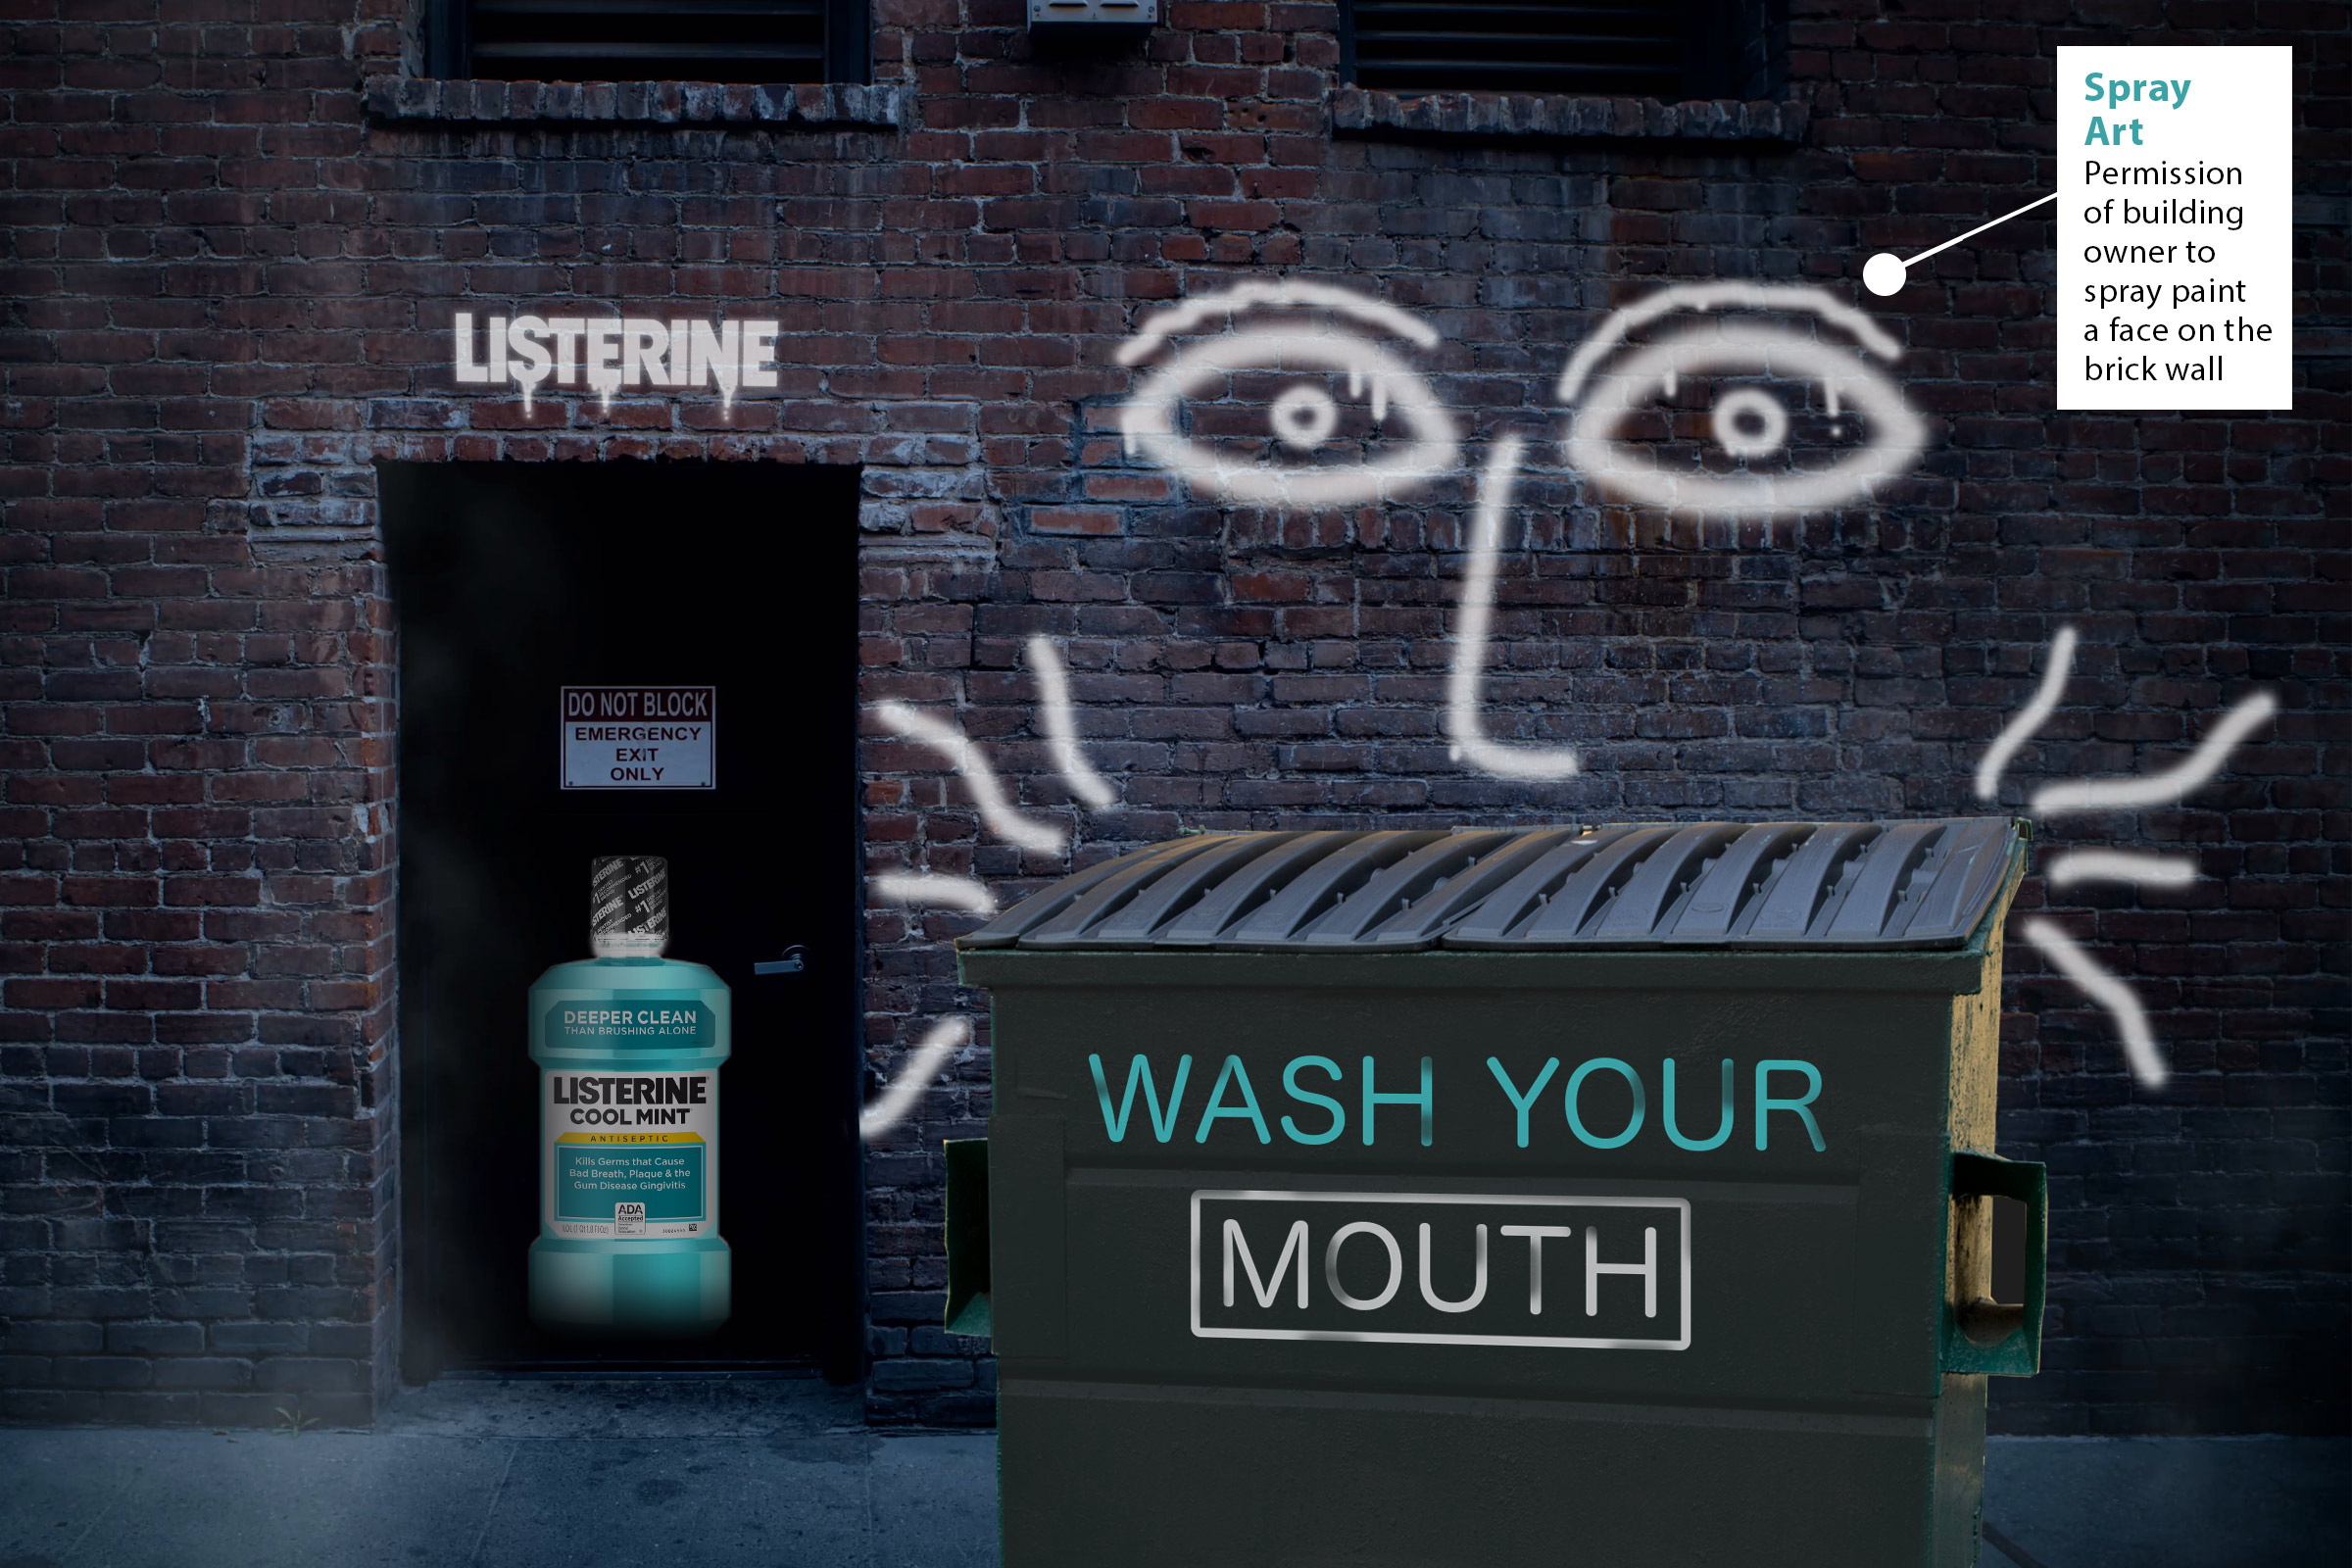 Listerine-Wash_Your_Mouth_Outdoor_spray.jpg